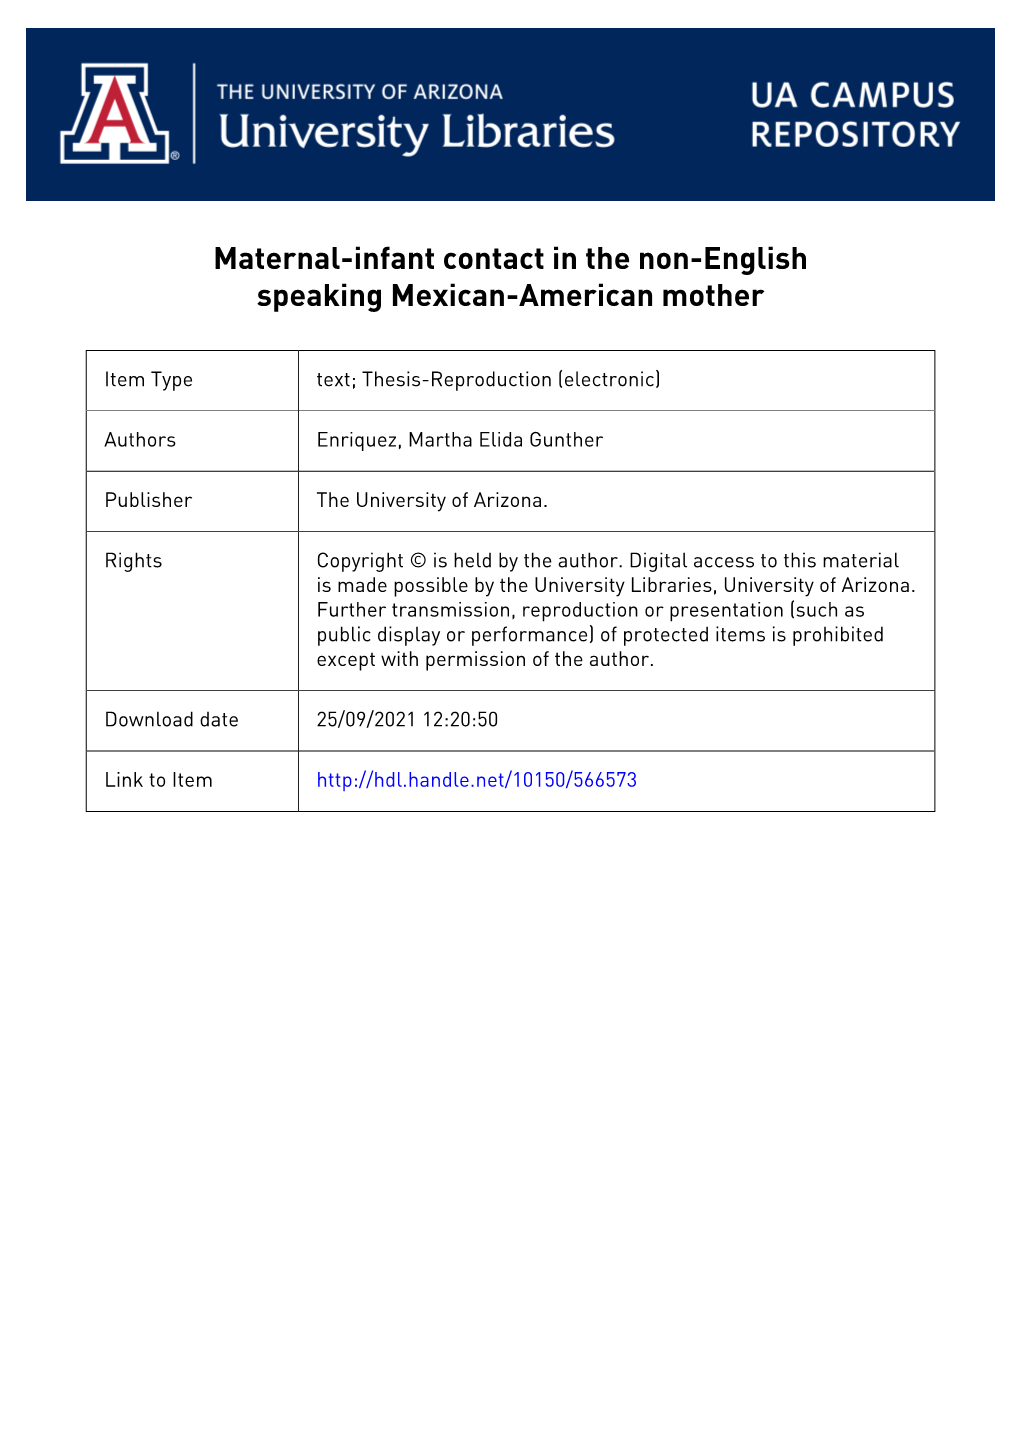 Maternal-Infant Contact in the Non-English Speaking Mexican-American Mother